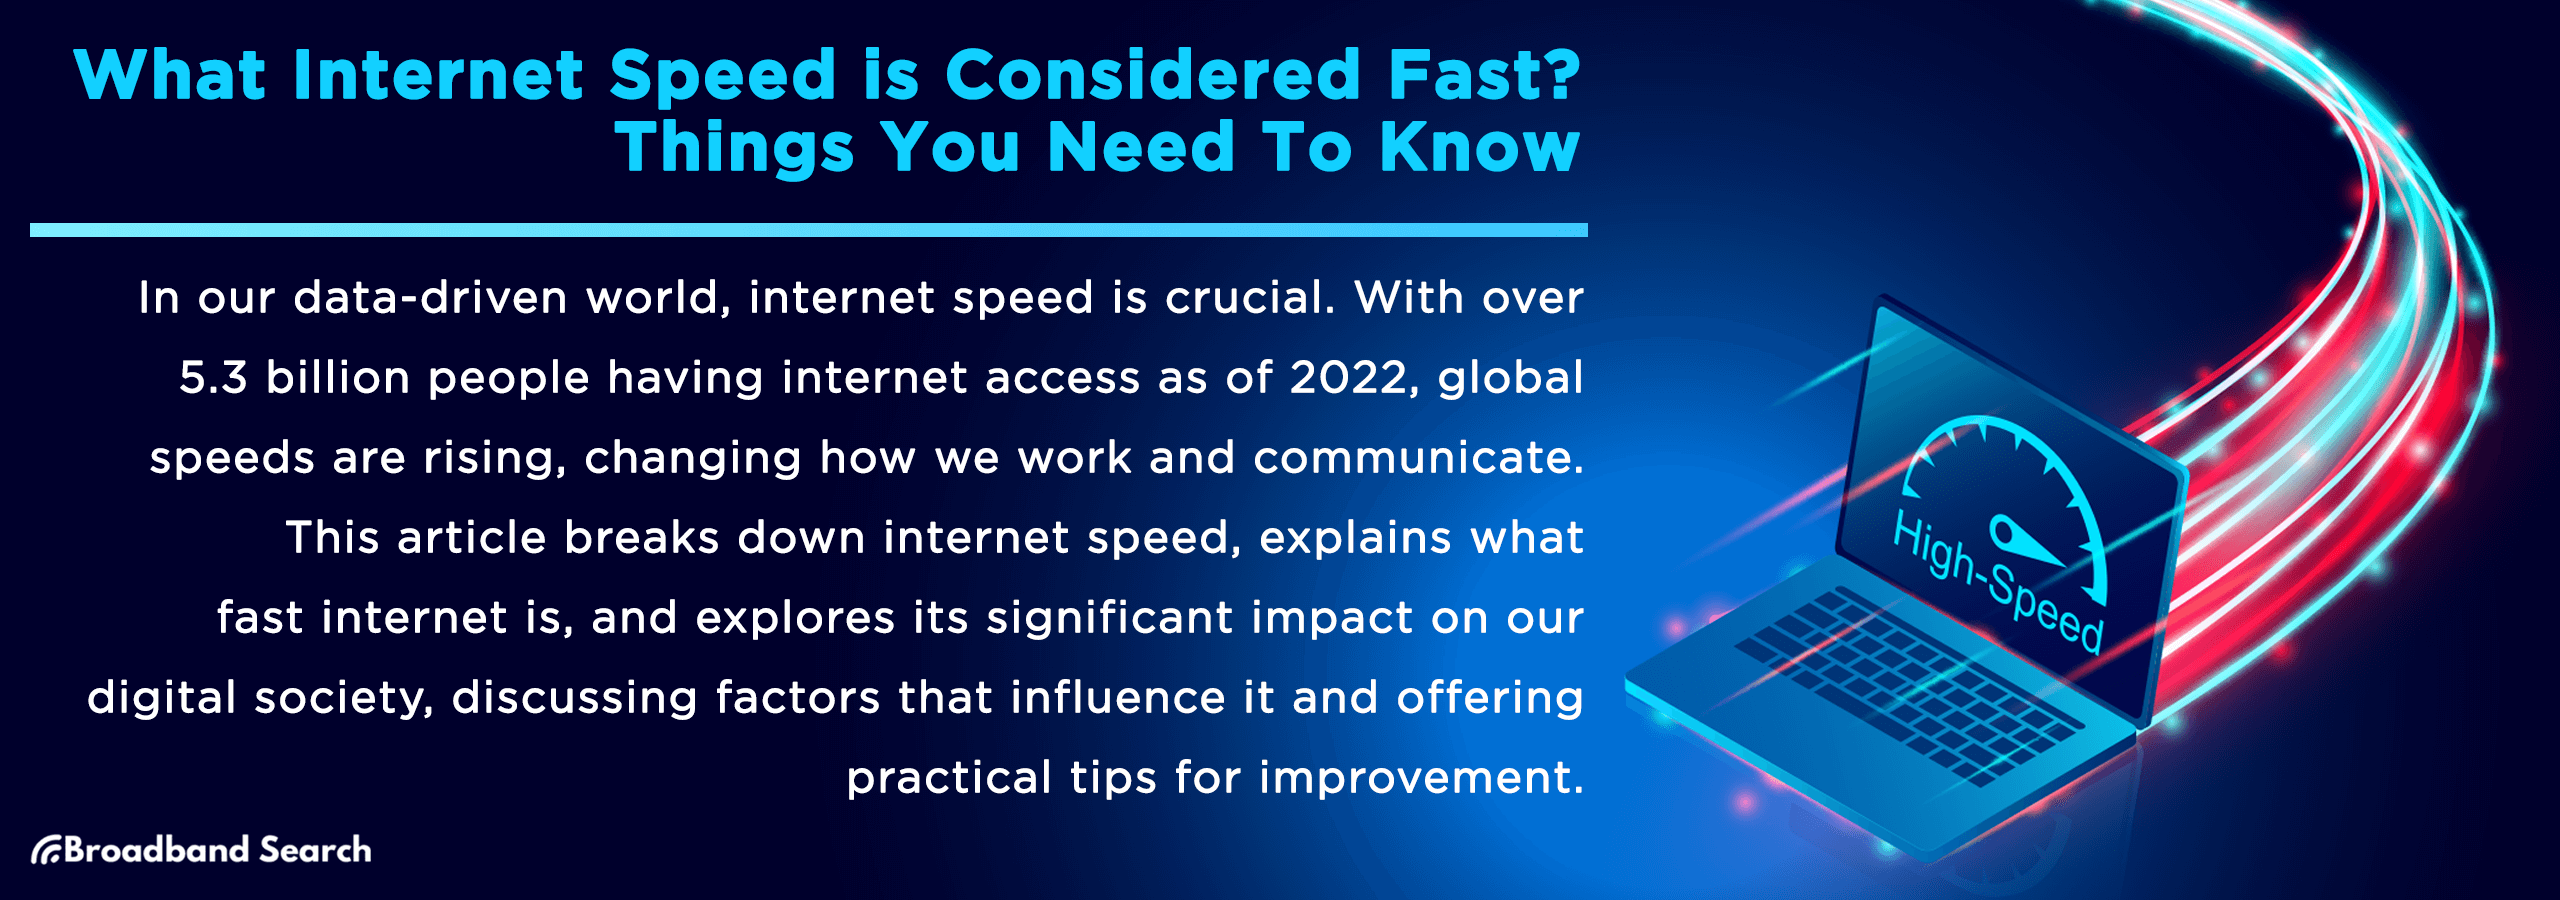 What Internet Speed is Considered Fast? Things You Need to Know